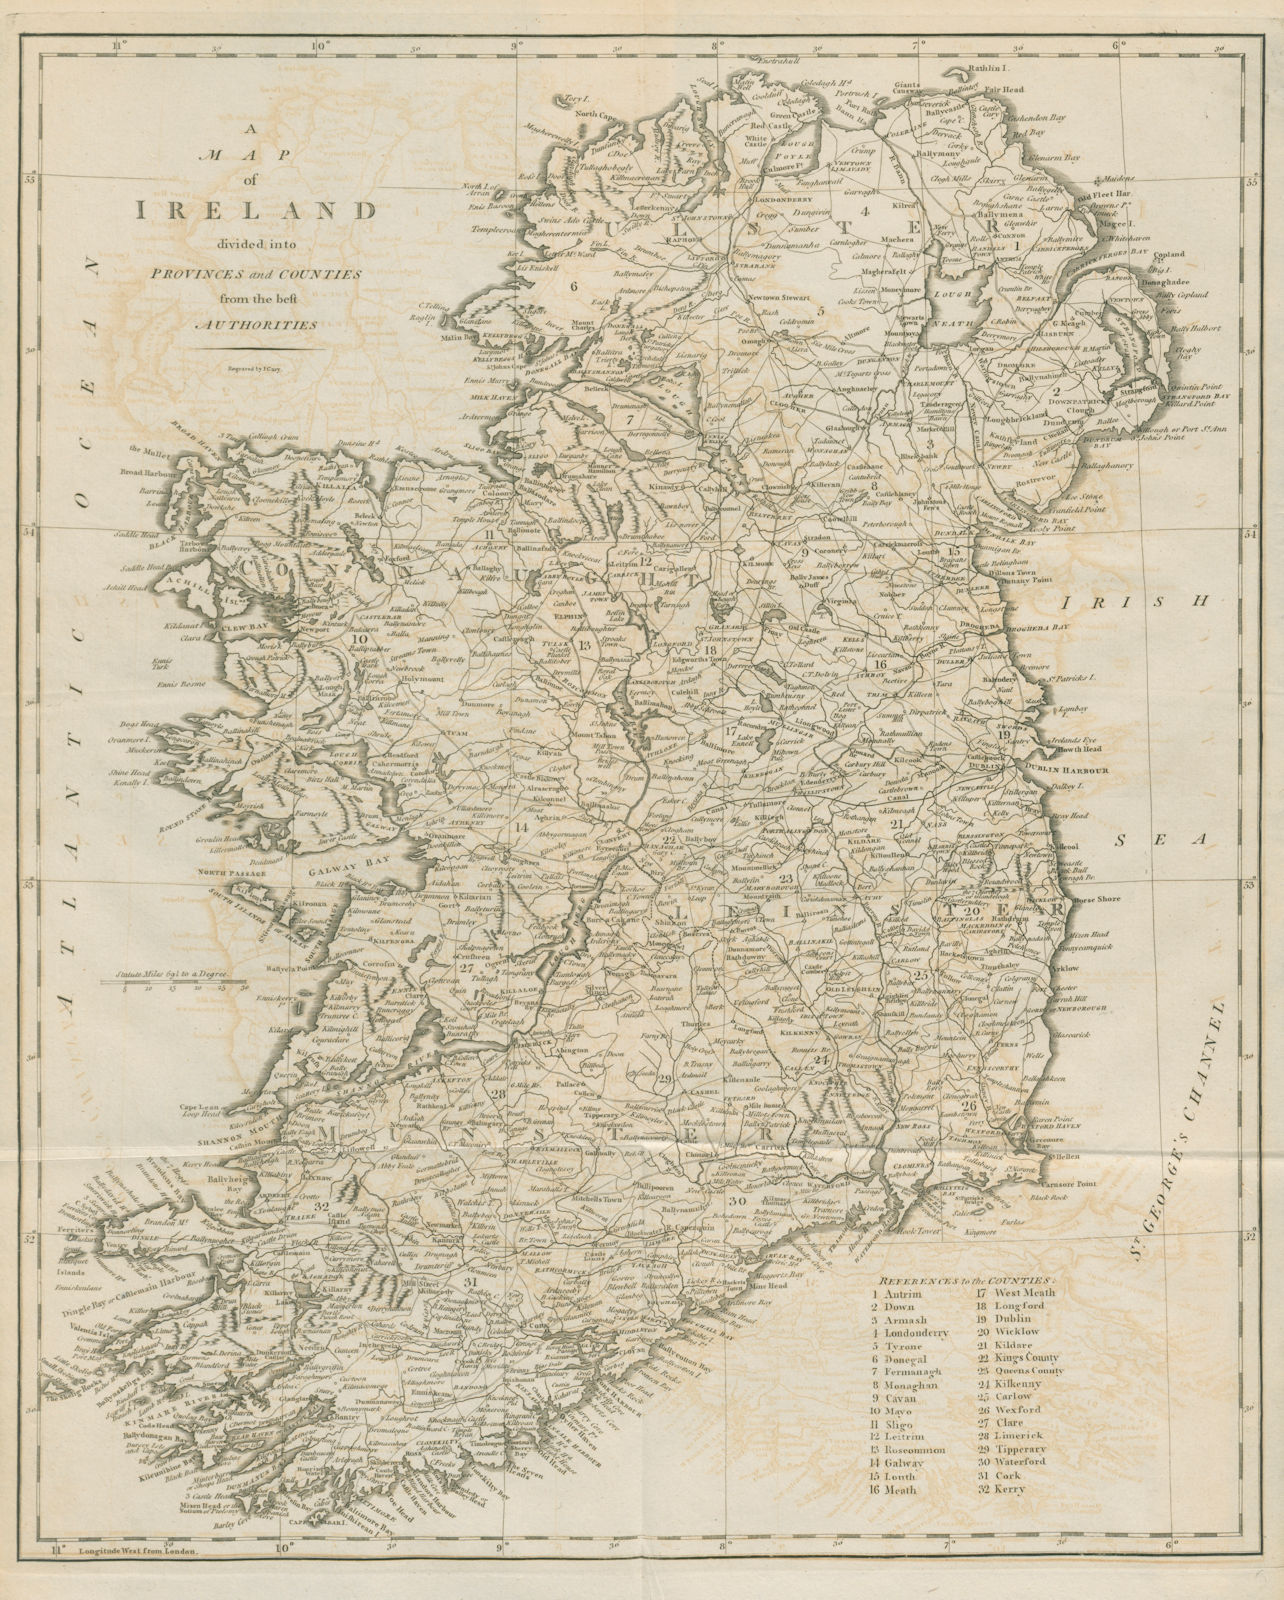 "A map of Ireland divided into provinces and counties…" by John CARY 1789